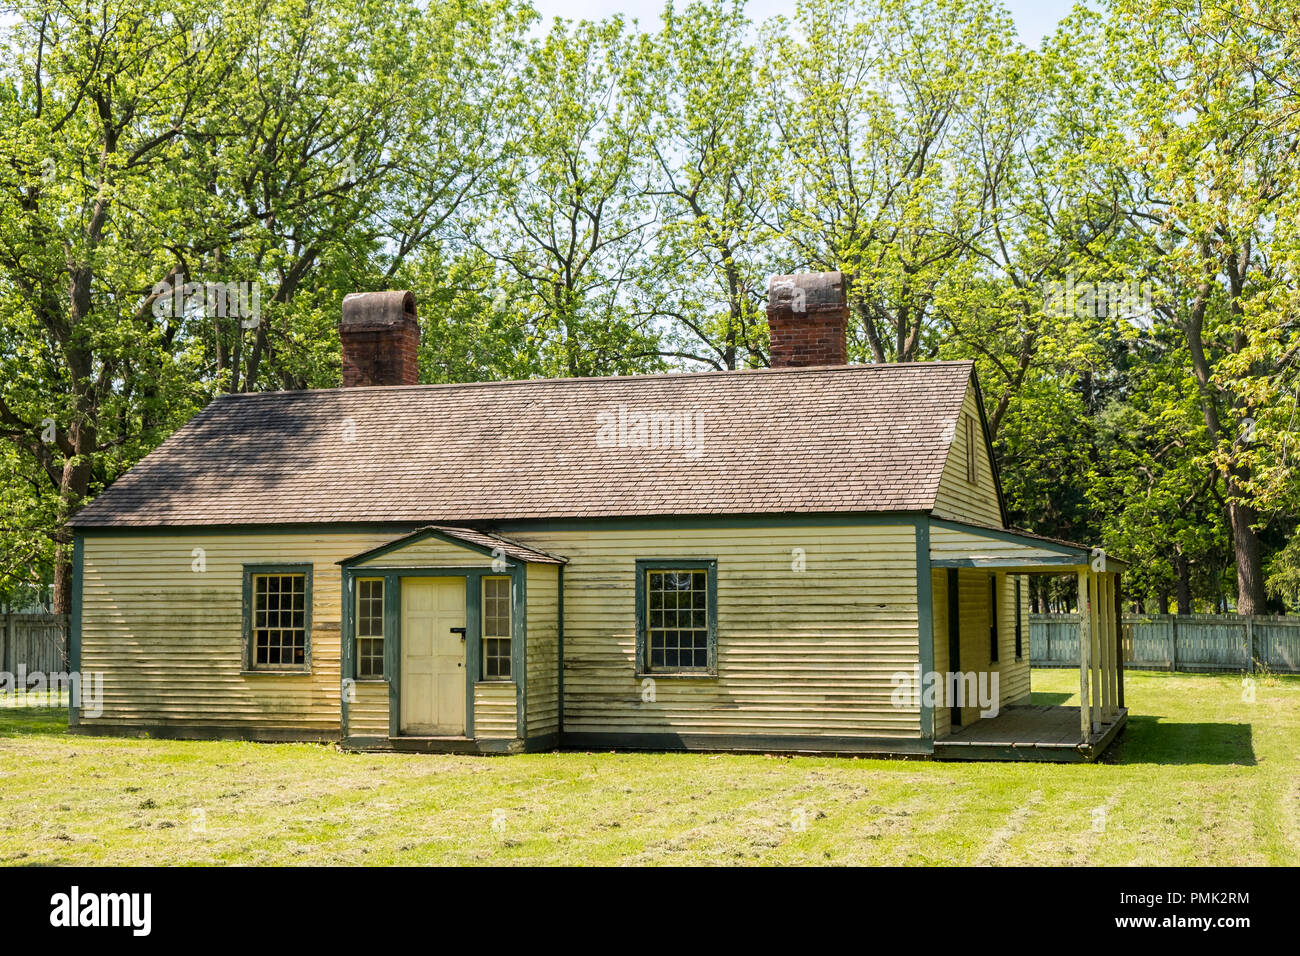 The Junior Commissariat Officer’s Quarters is located at Butler's Barrack in Niagara on the Lake, Ontario, Canada. Stock Photo